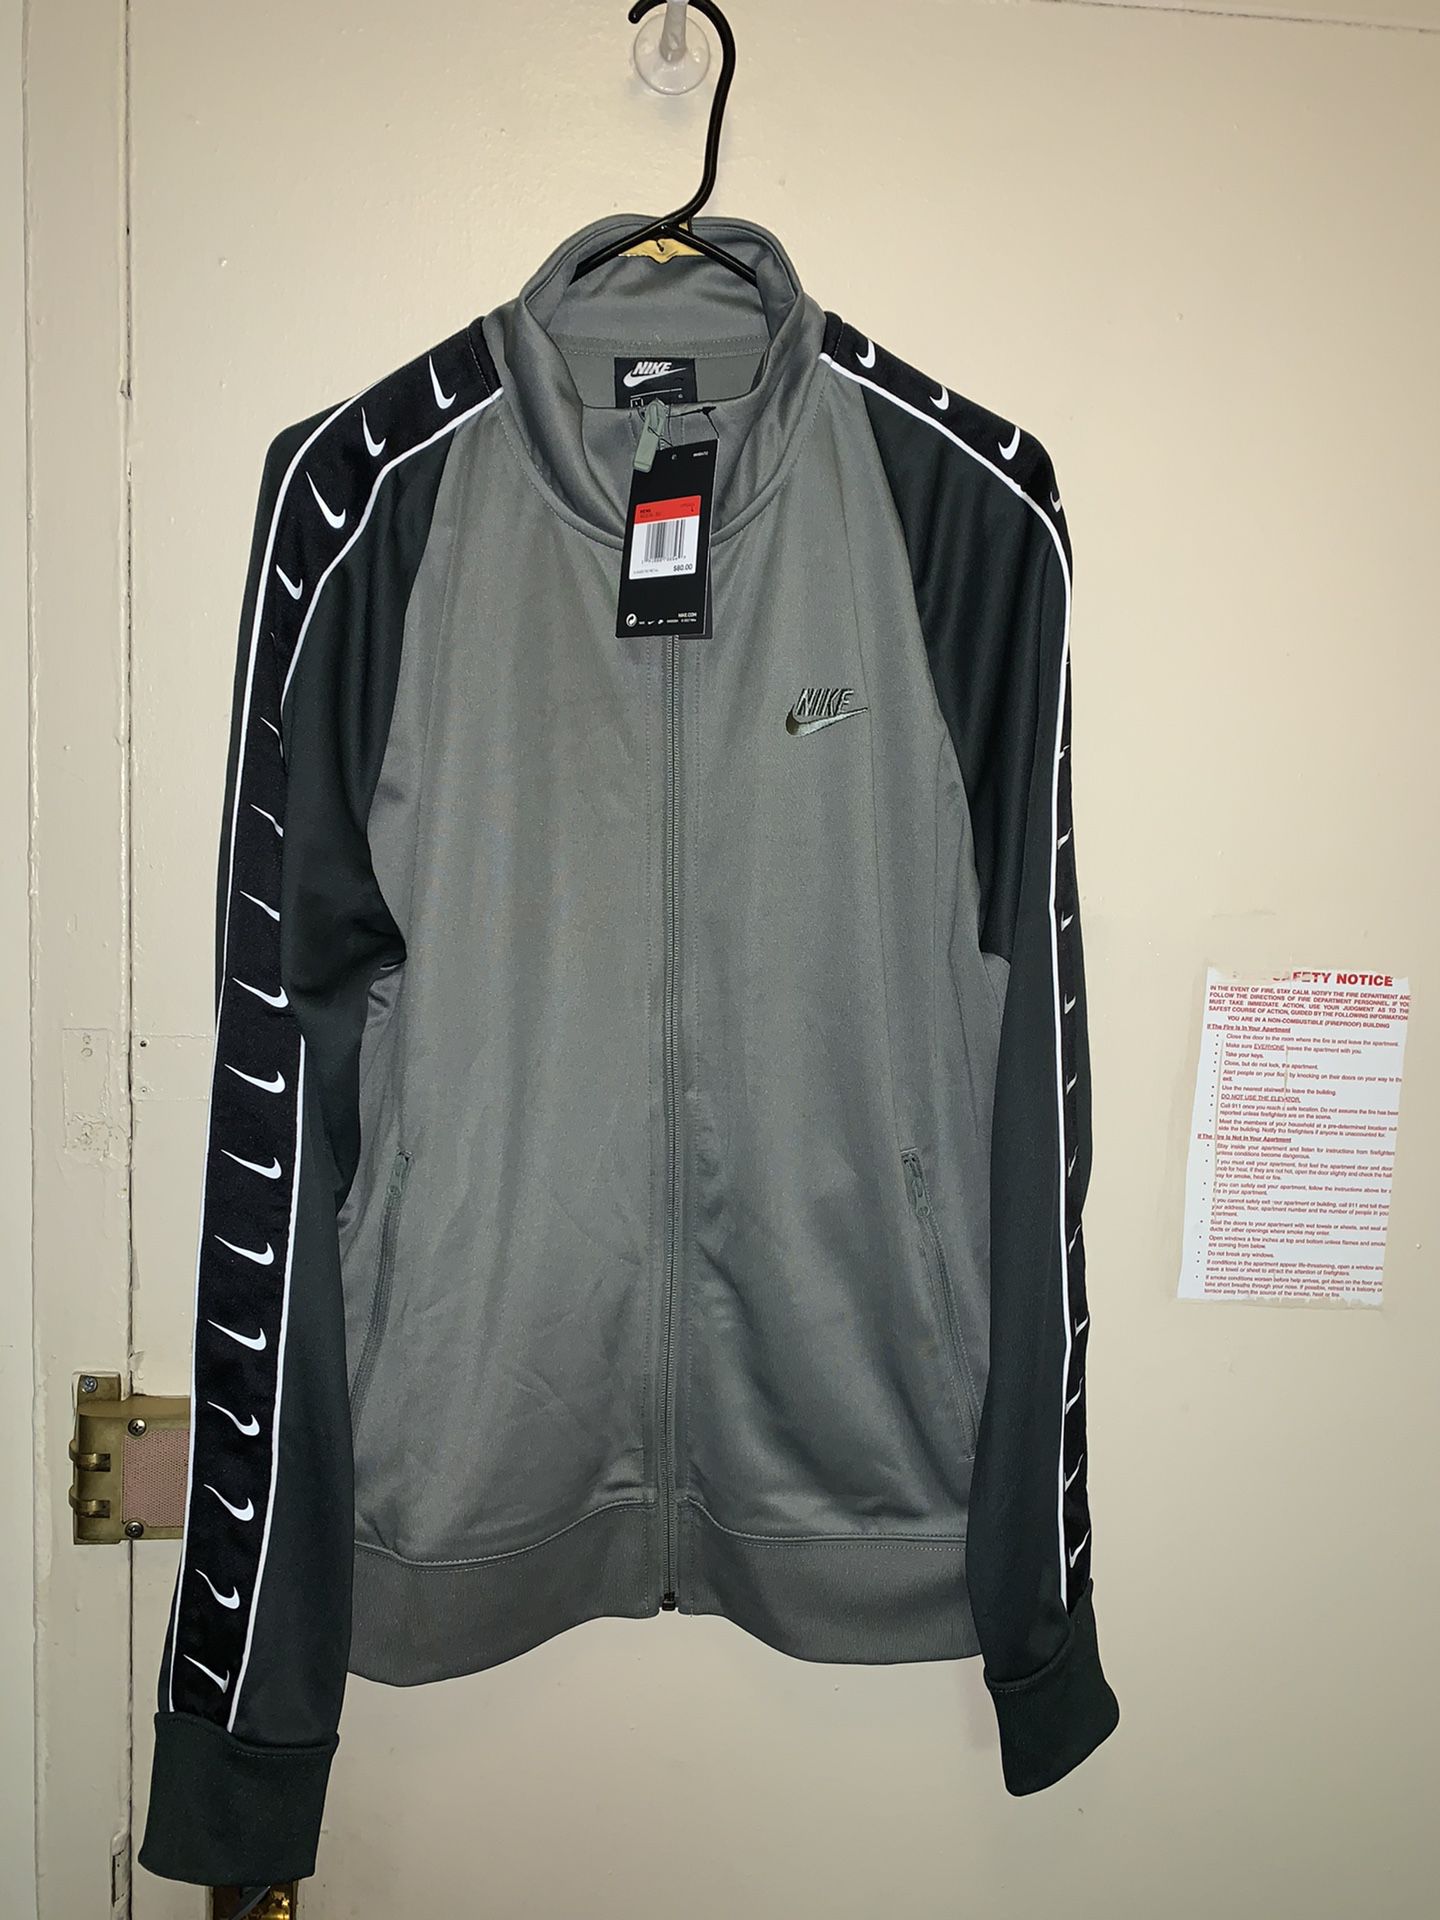 Brand new men’s Nike jacket size large .Price is firm